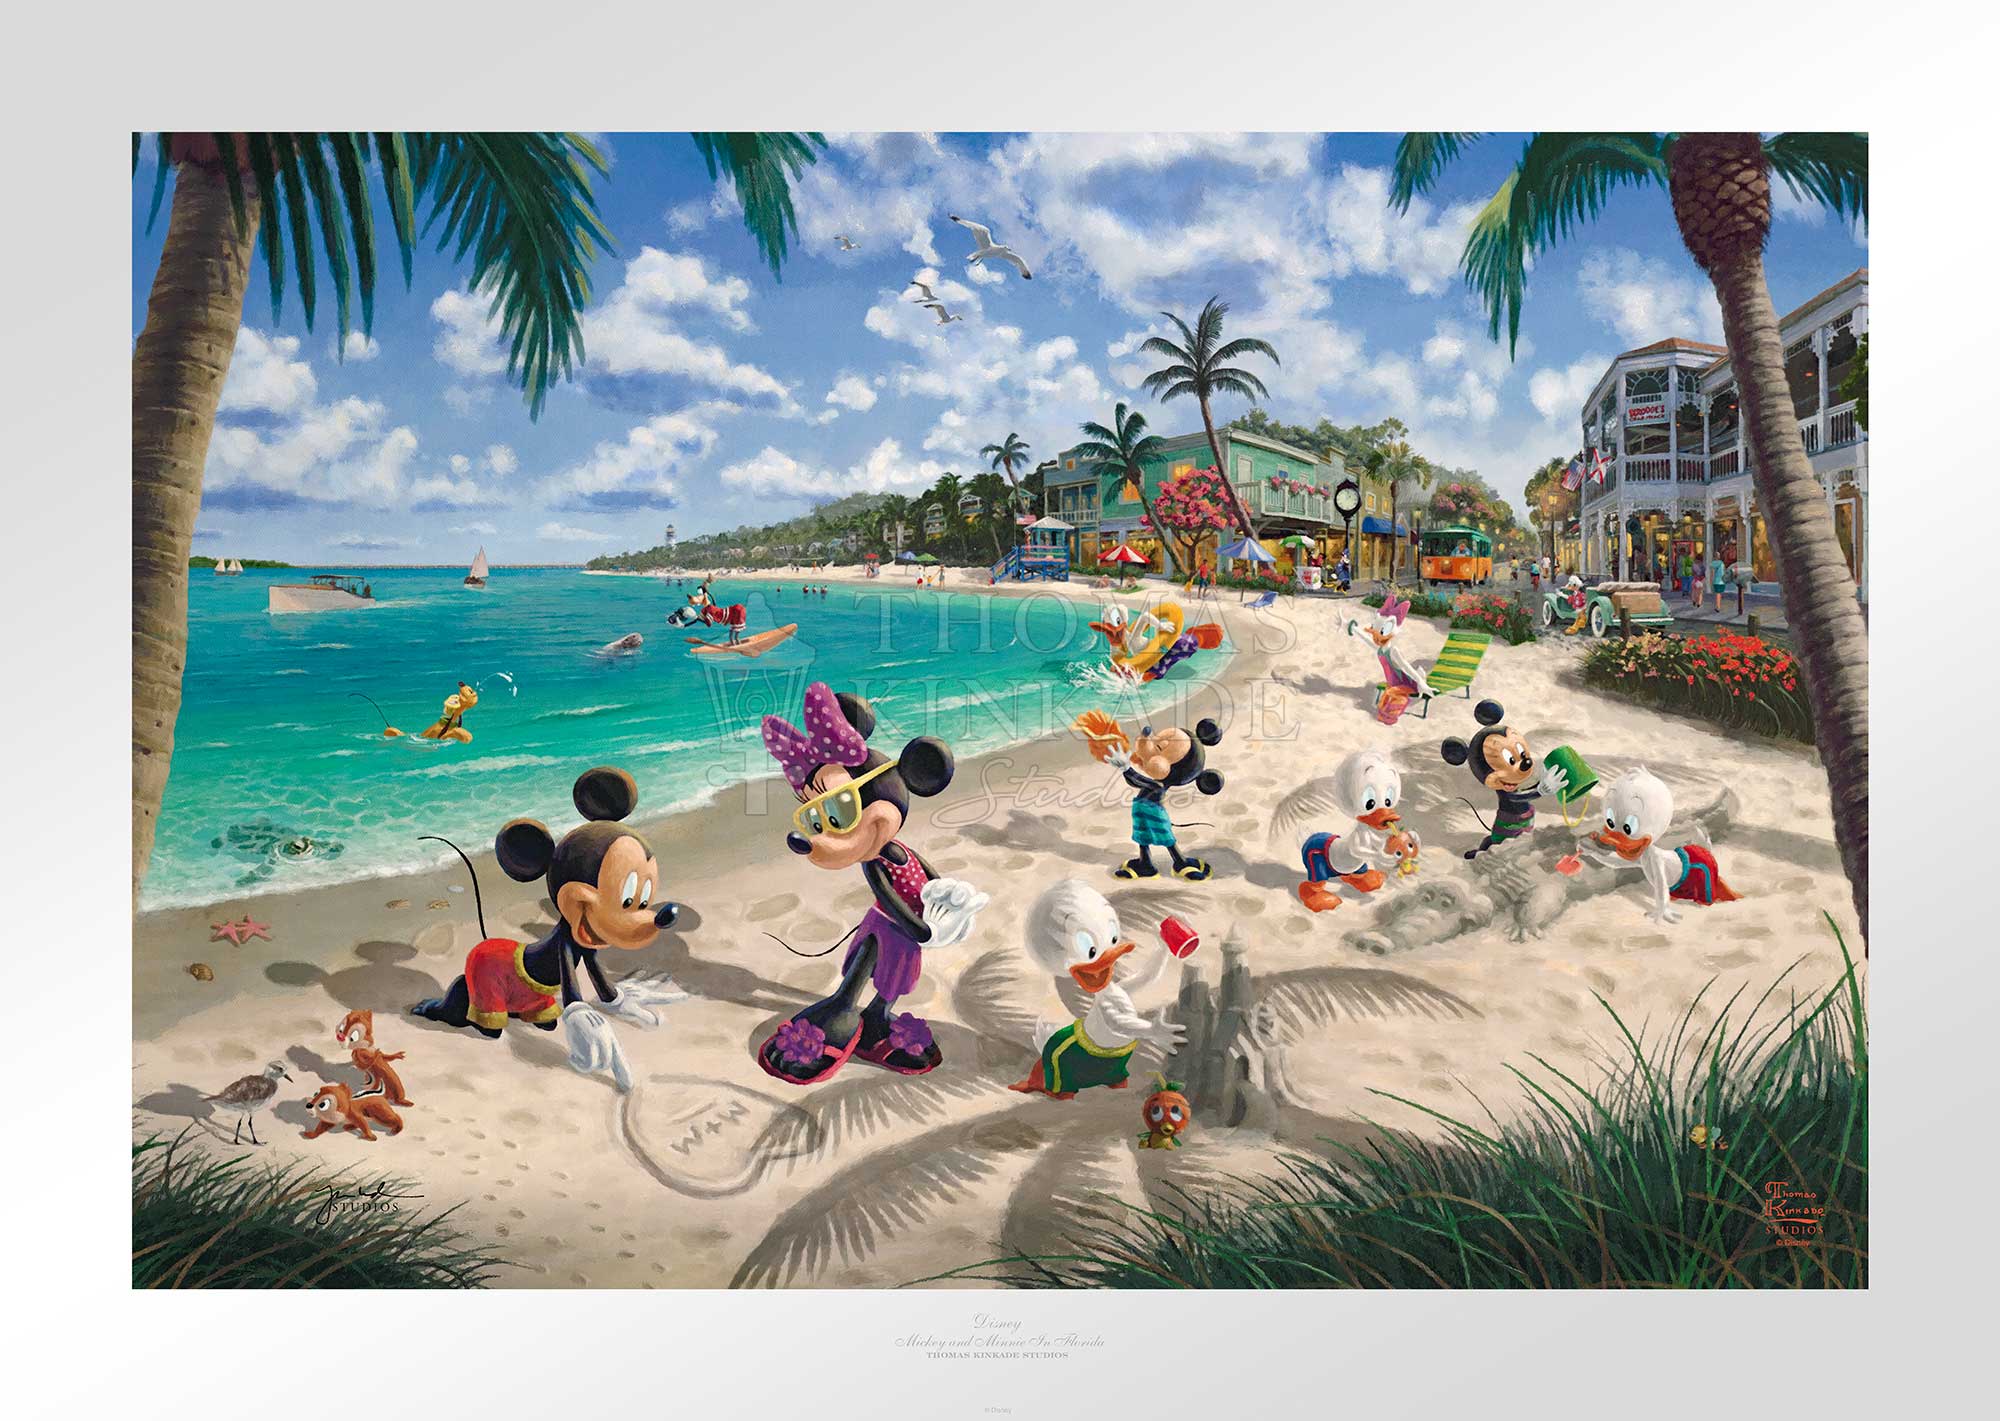 In this scene, Mickey Mouse and Minnie Mouse enjoy a warm afternoon on a sandy Key West beach with family and friends, - Unframed